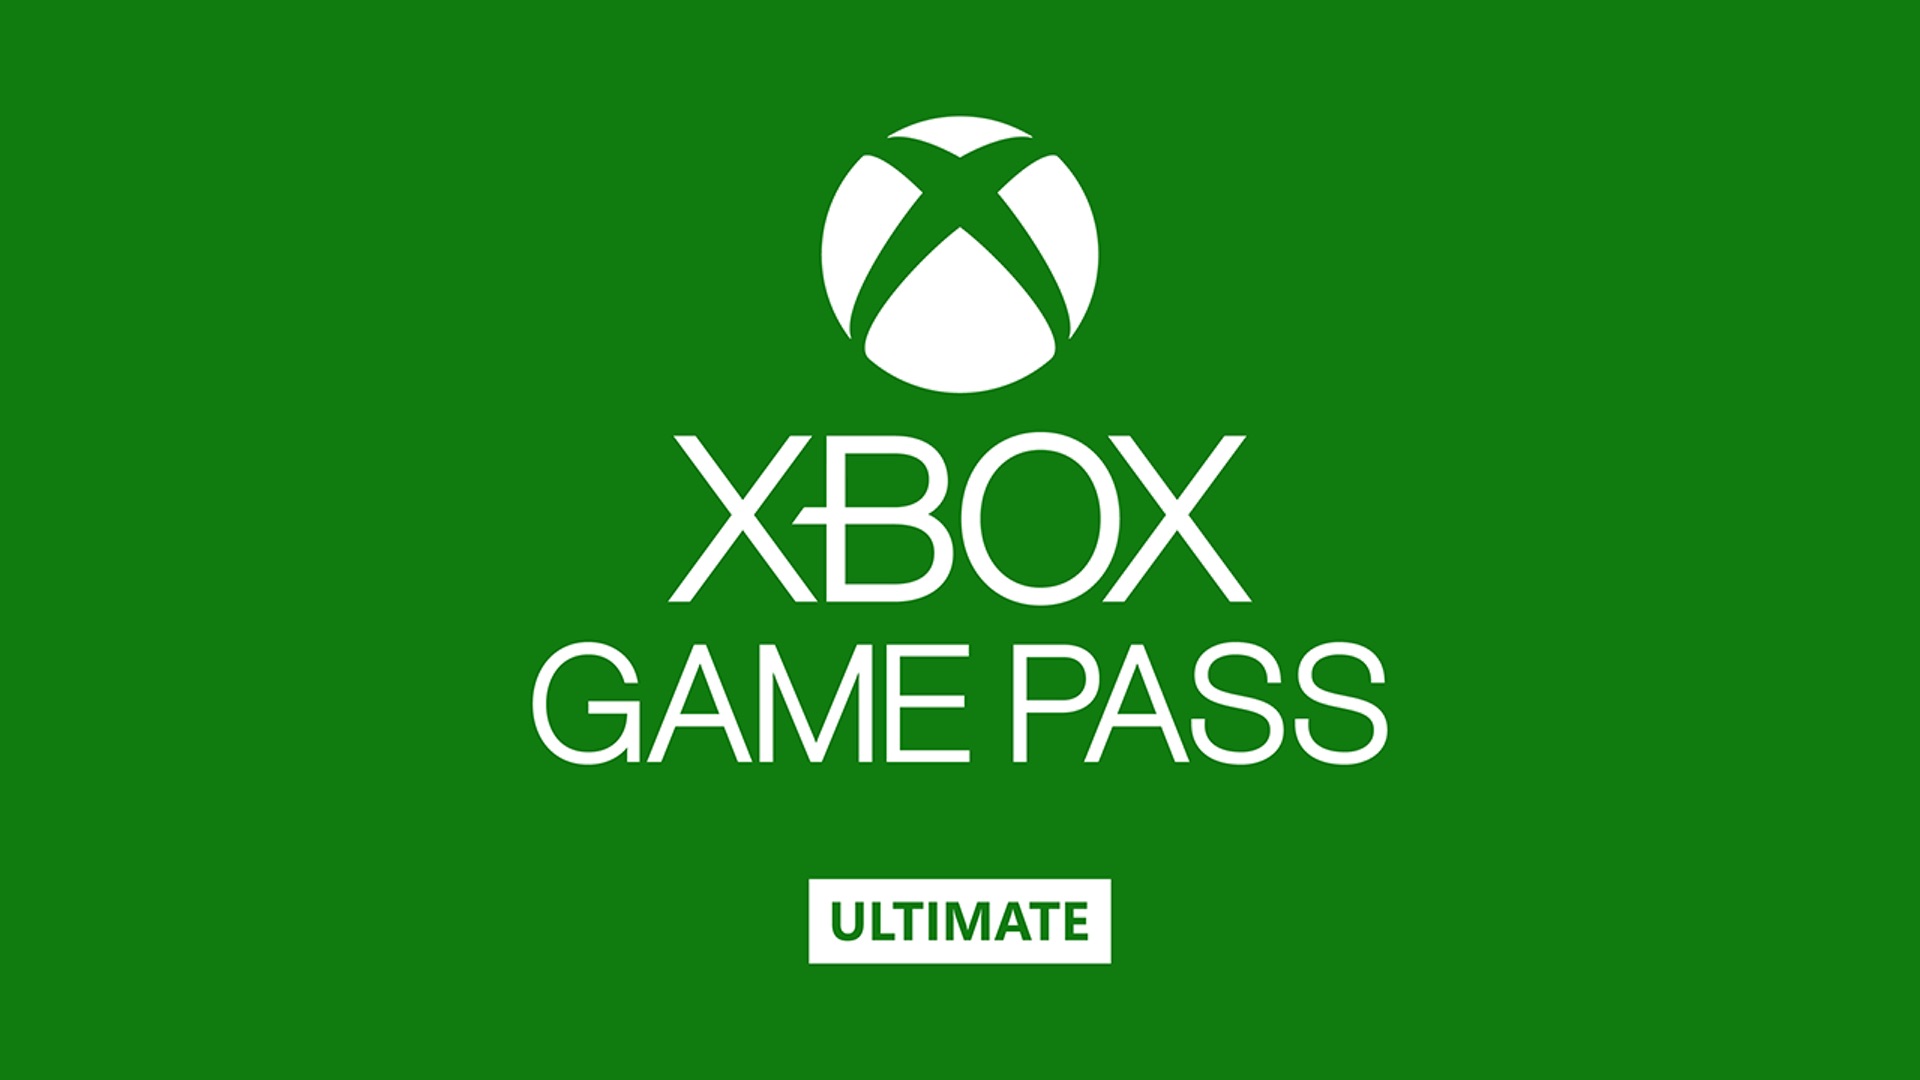 Is Xbox Game Pass Ultimate worth it?